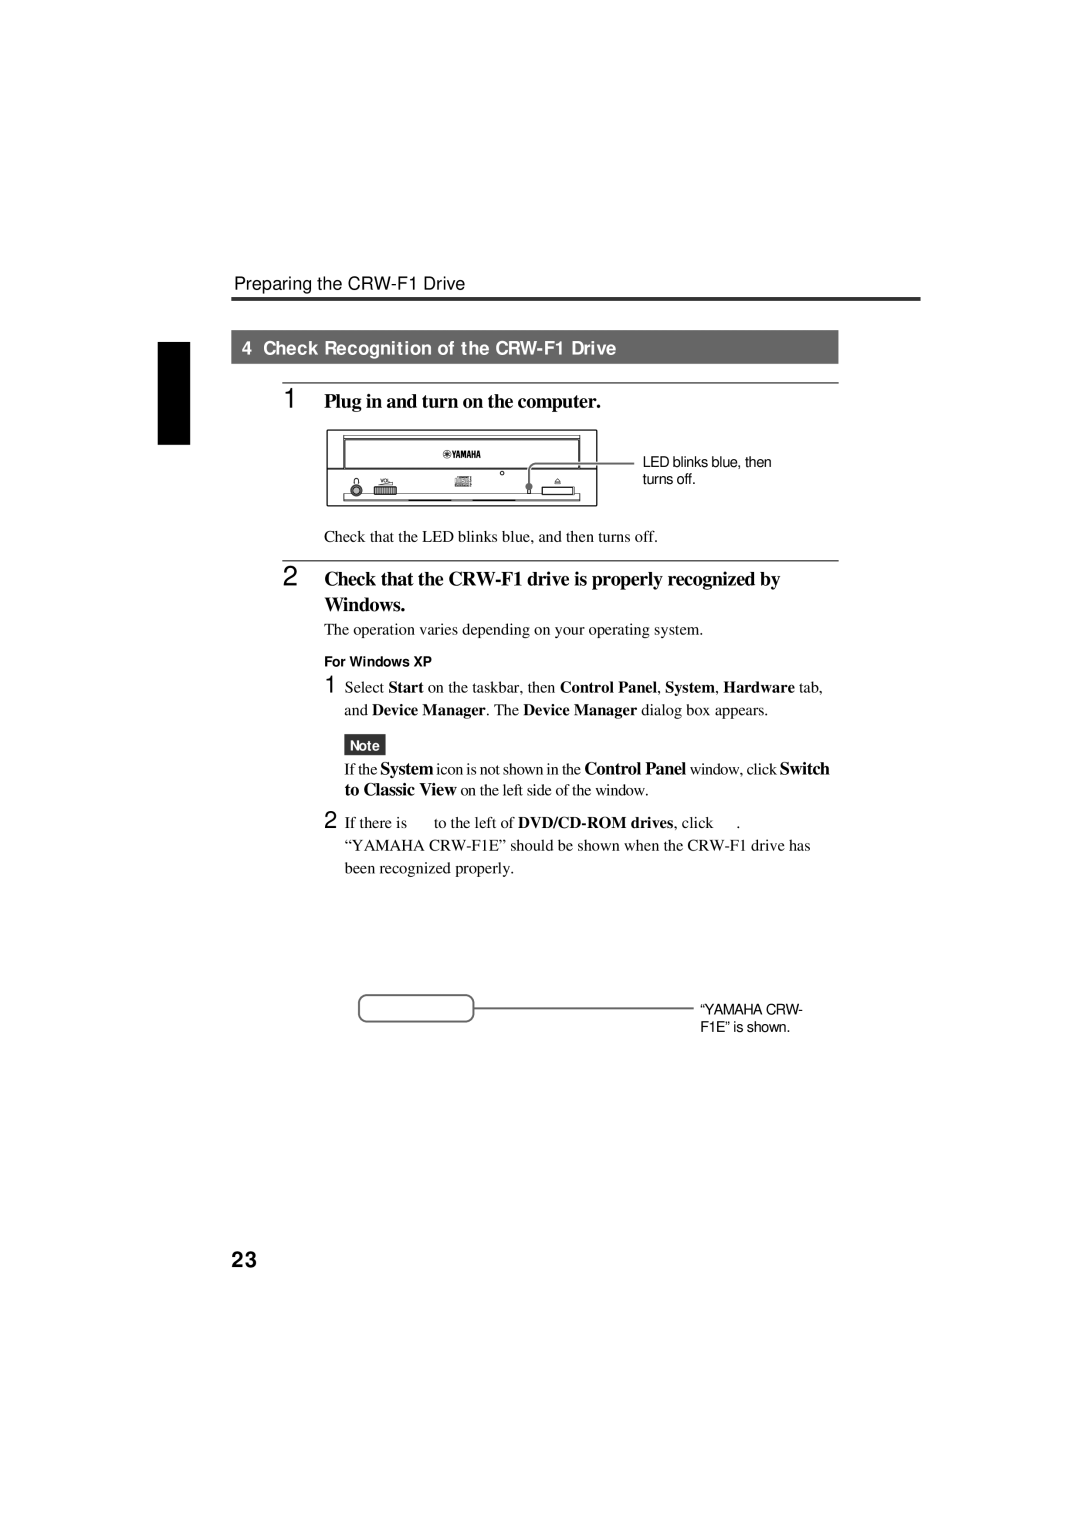 Yamaha CRW-F1-NB manual Check Recognition of the CRW-F1 Drive, For Windows XP 